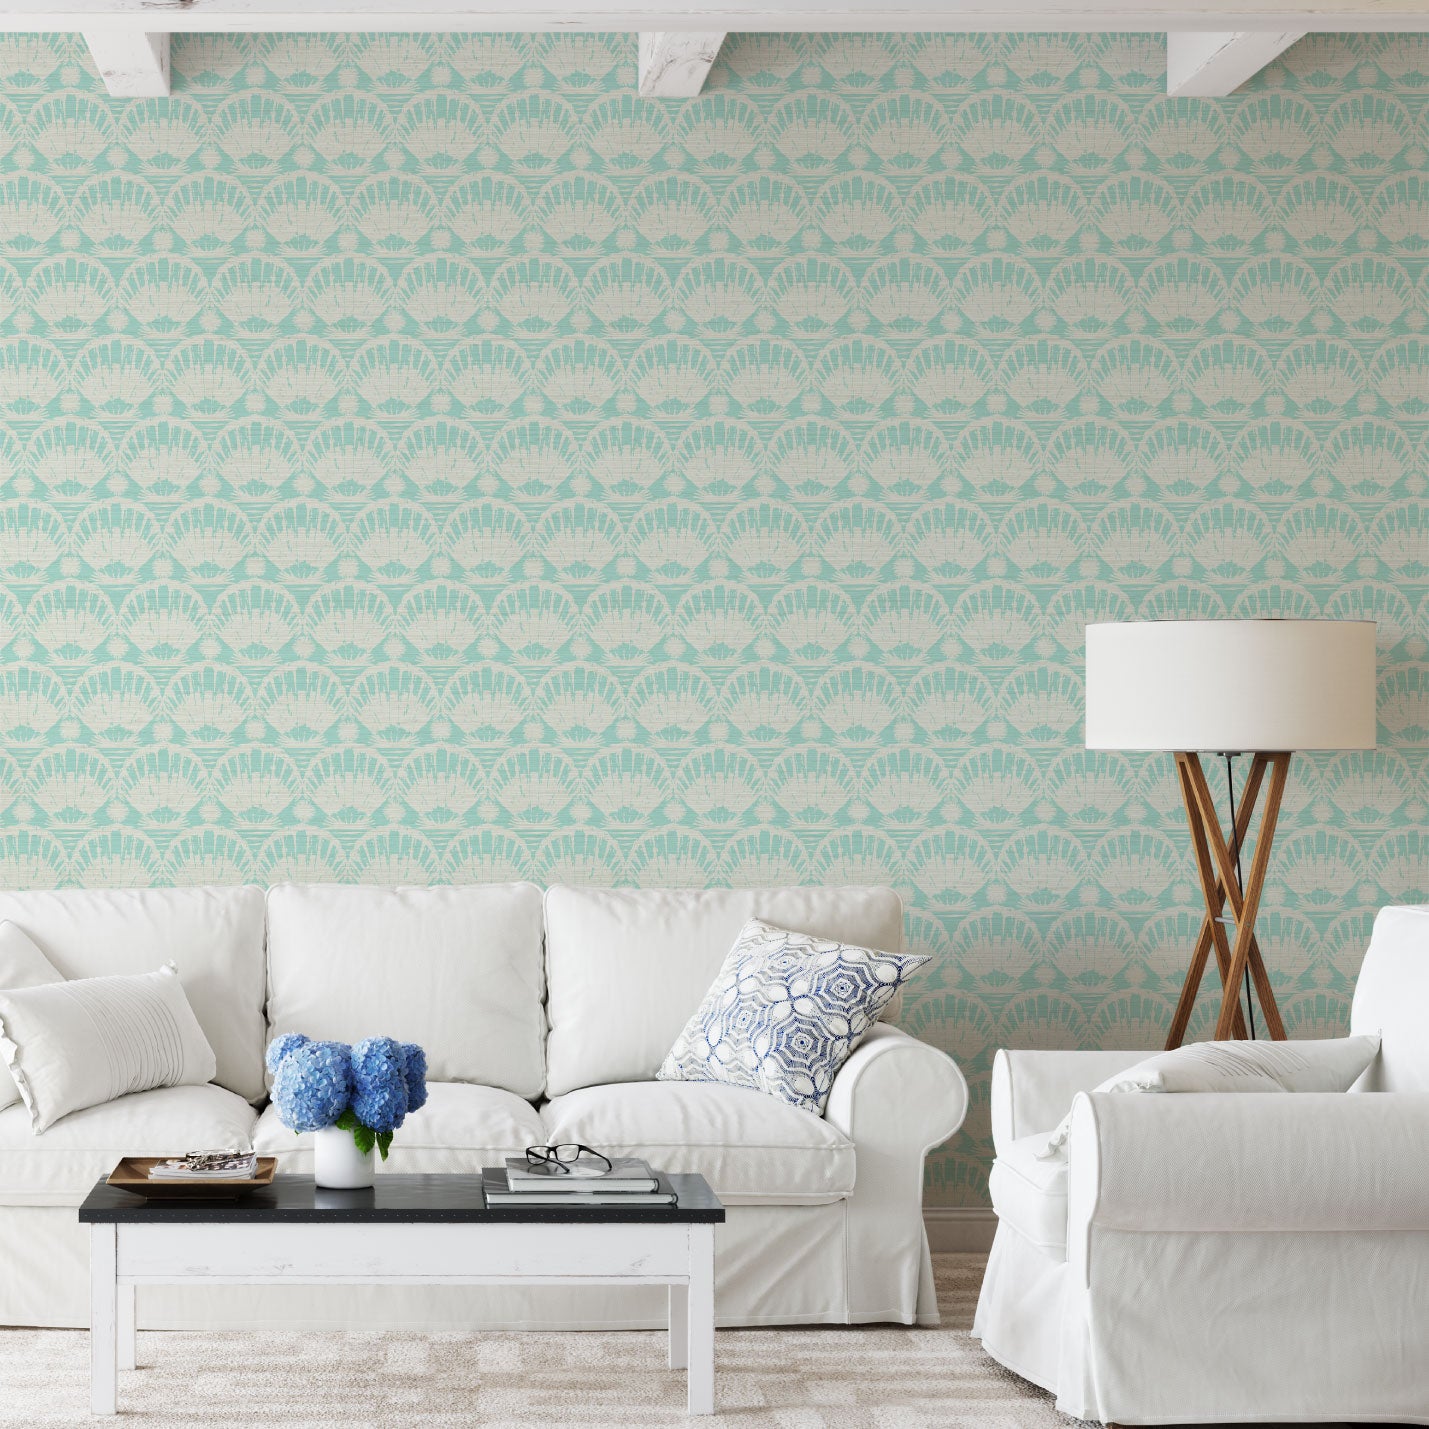 Load image into Gallery viewer, printed grasscloth wallpaper in a 2 color stamped seashell print arranged in a linear horizontal pattern
